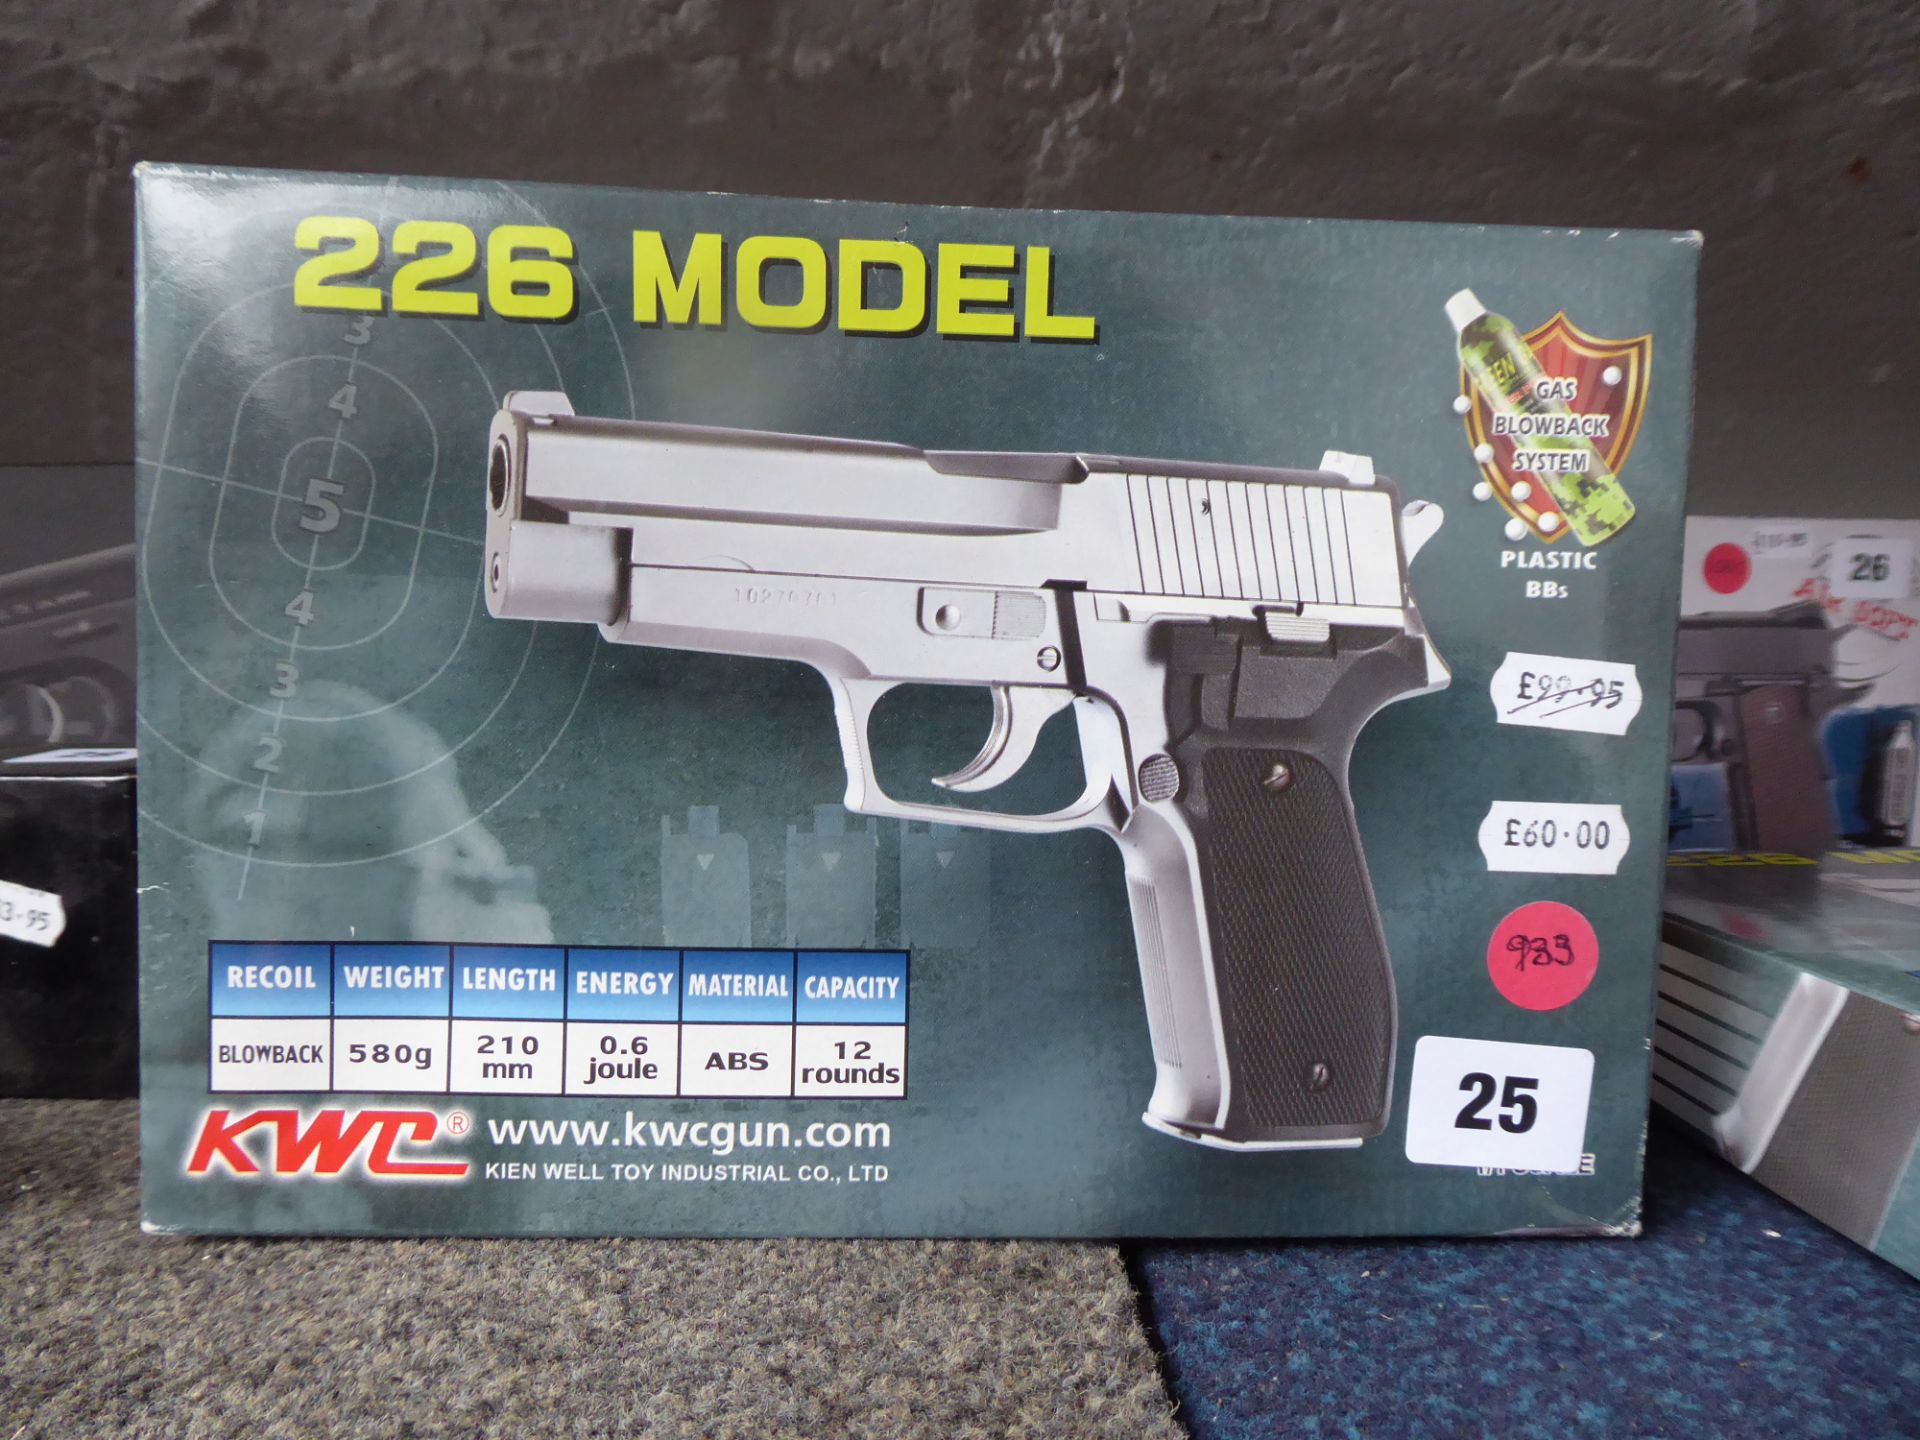 Boxed KWC 226 model 6mm BB airsoft pistol *This Lot is offered for the purposes of historical re-